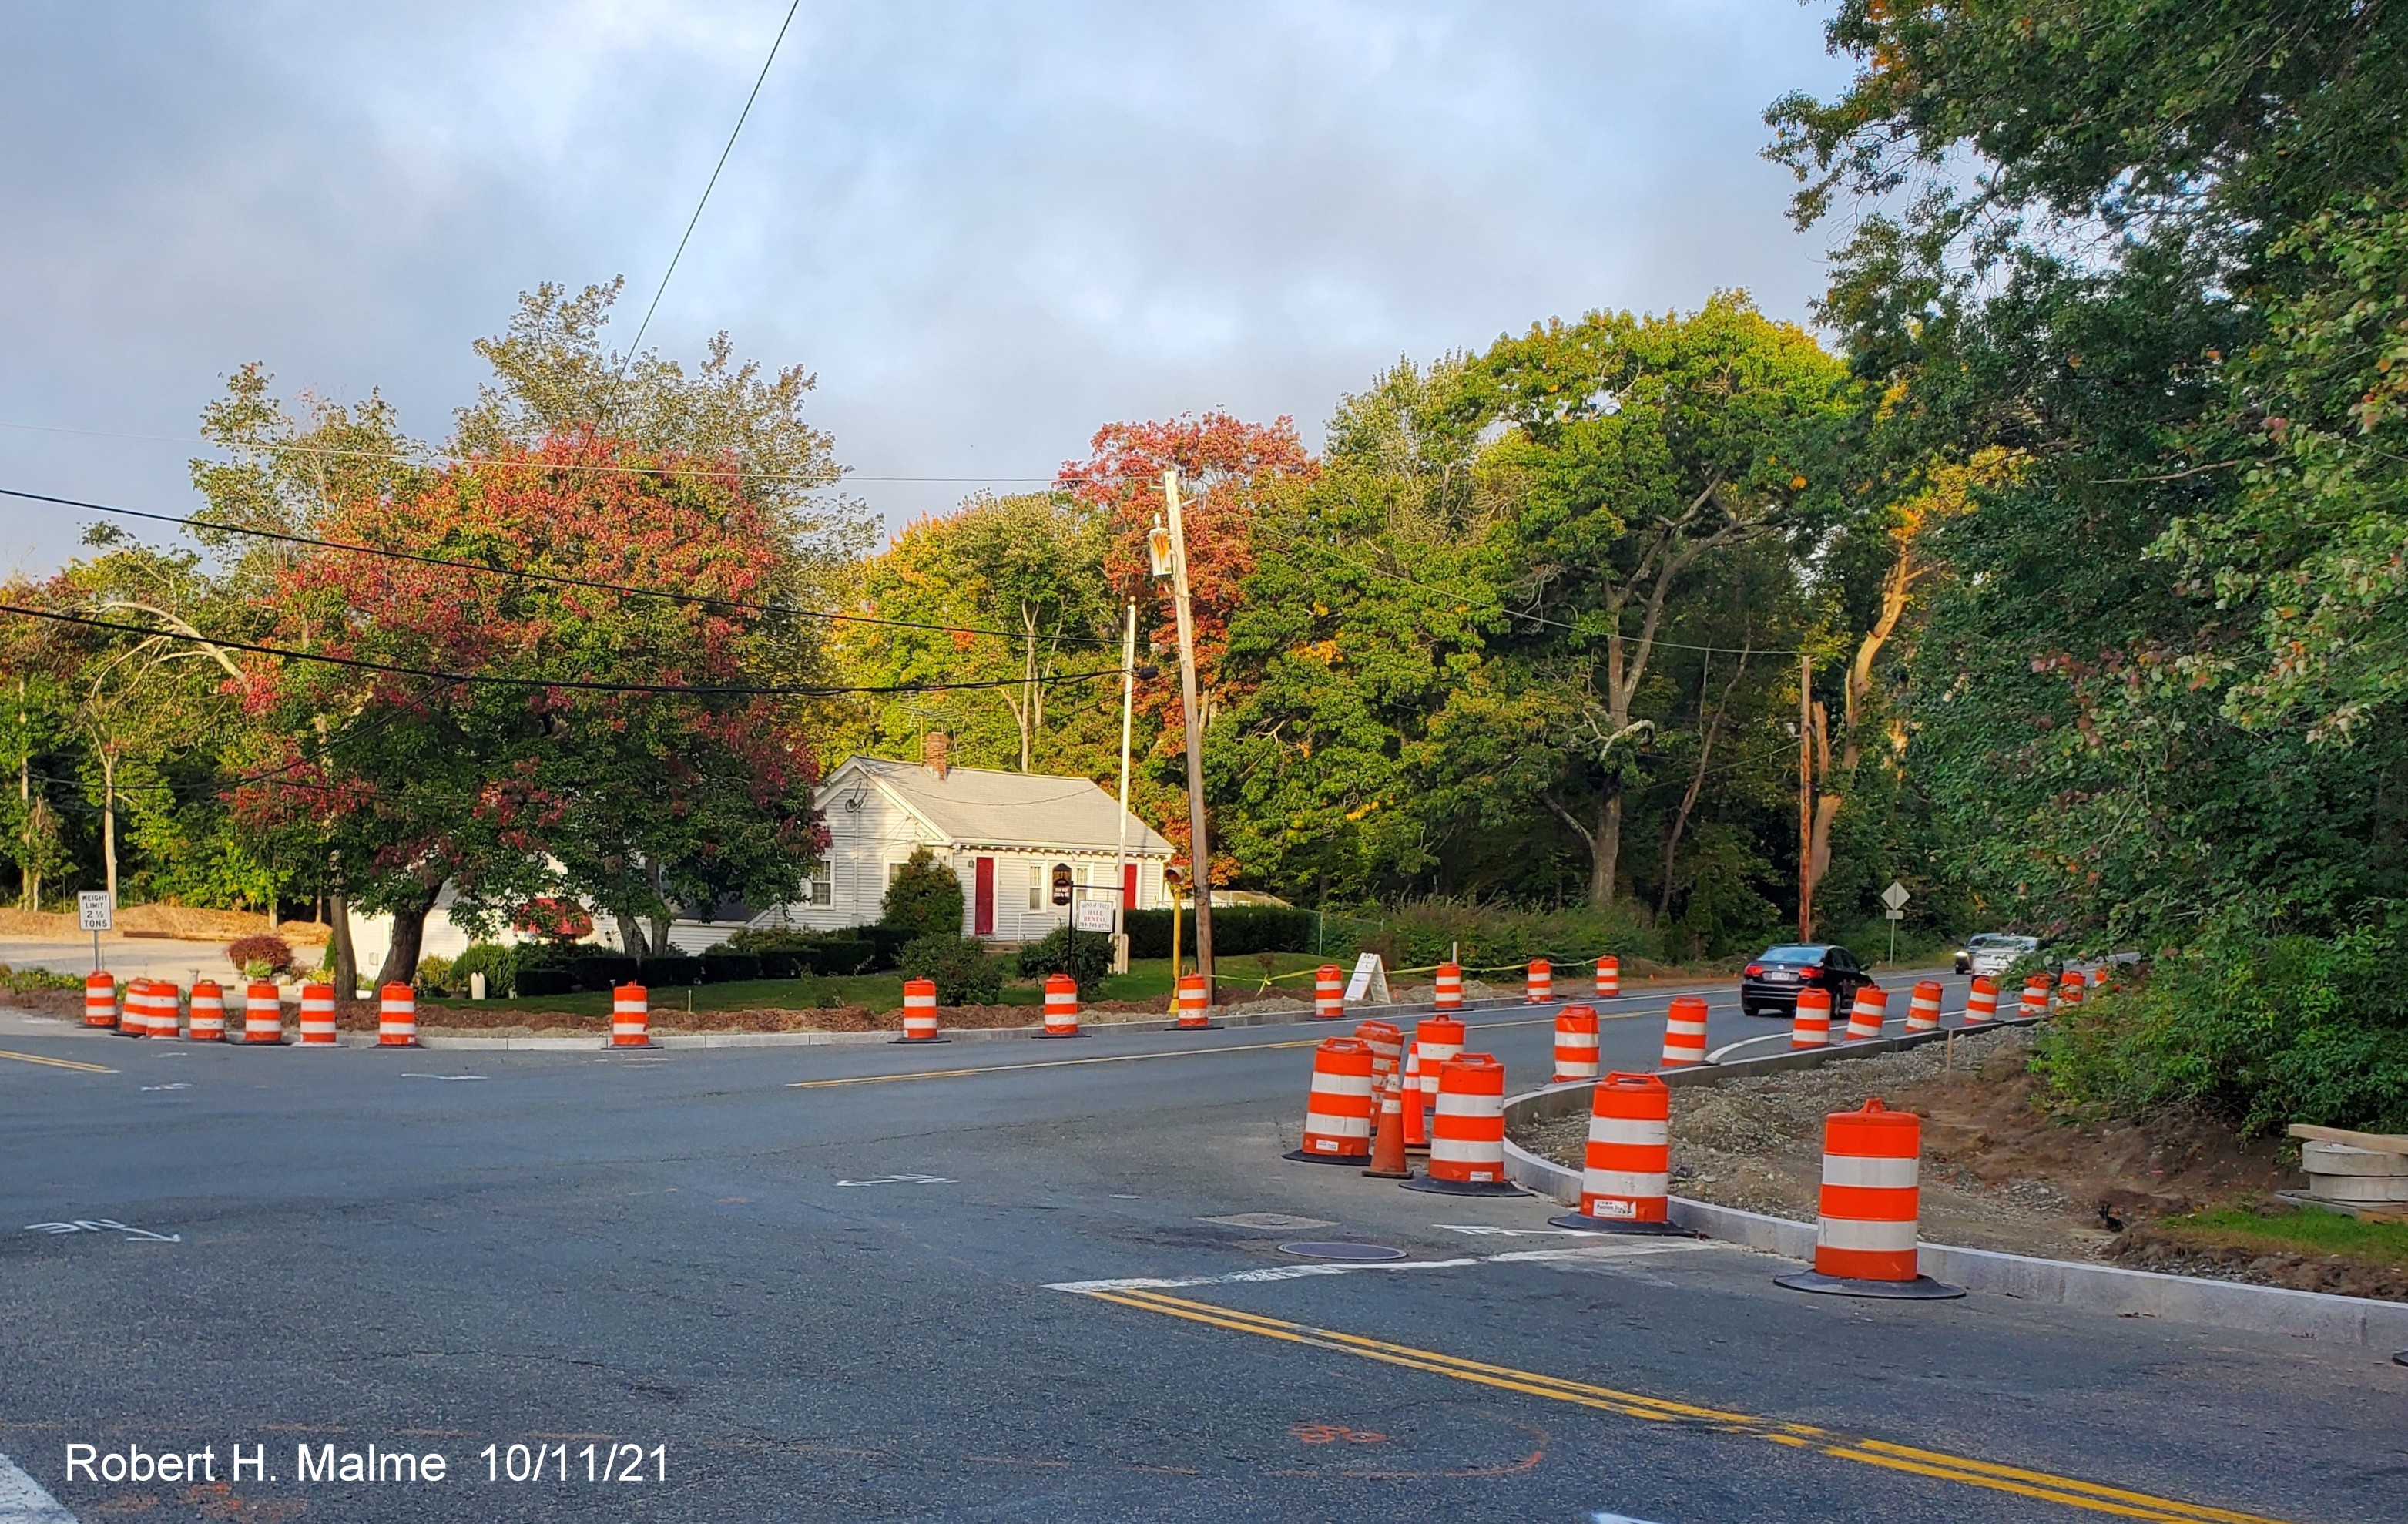 Image of initial curbing being constructed for Kilby Street/MA 3A intersection reconstruction in Hingham, October 2021